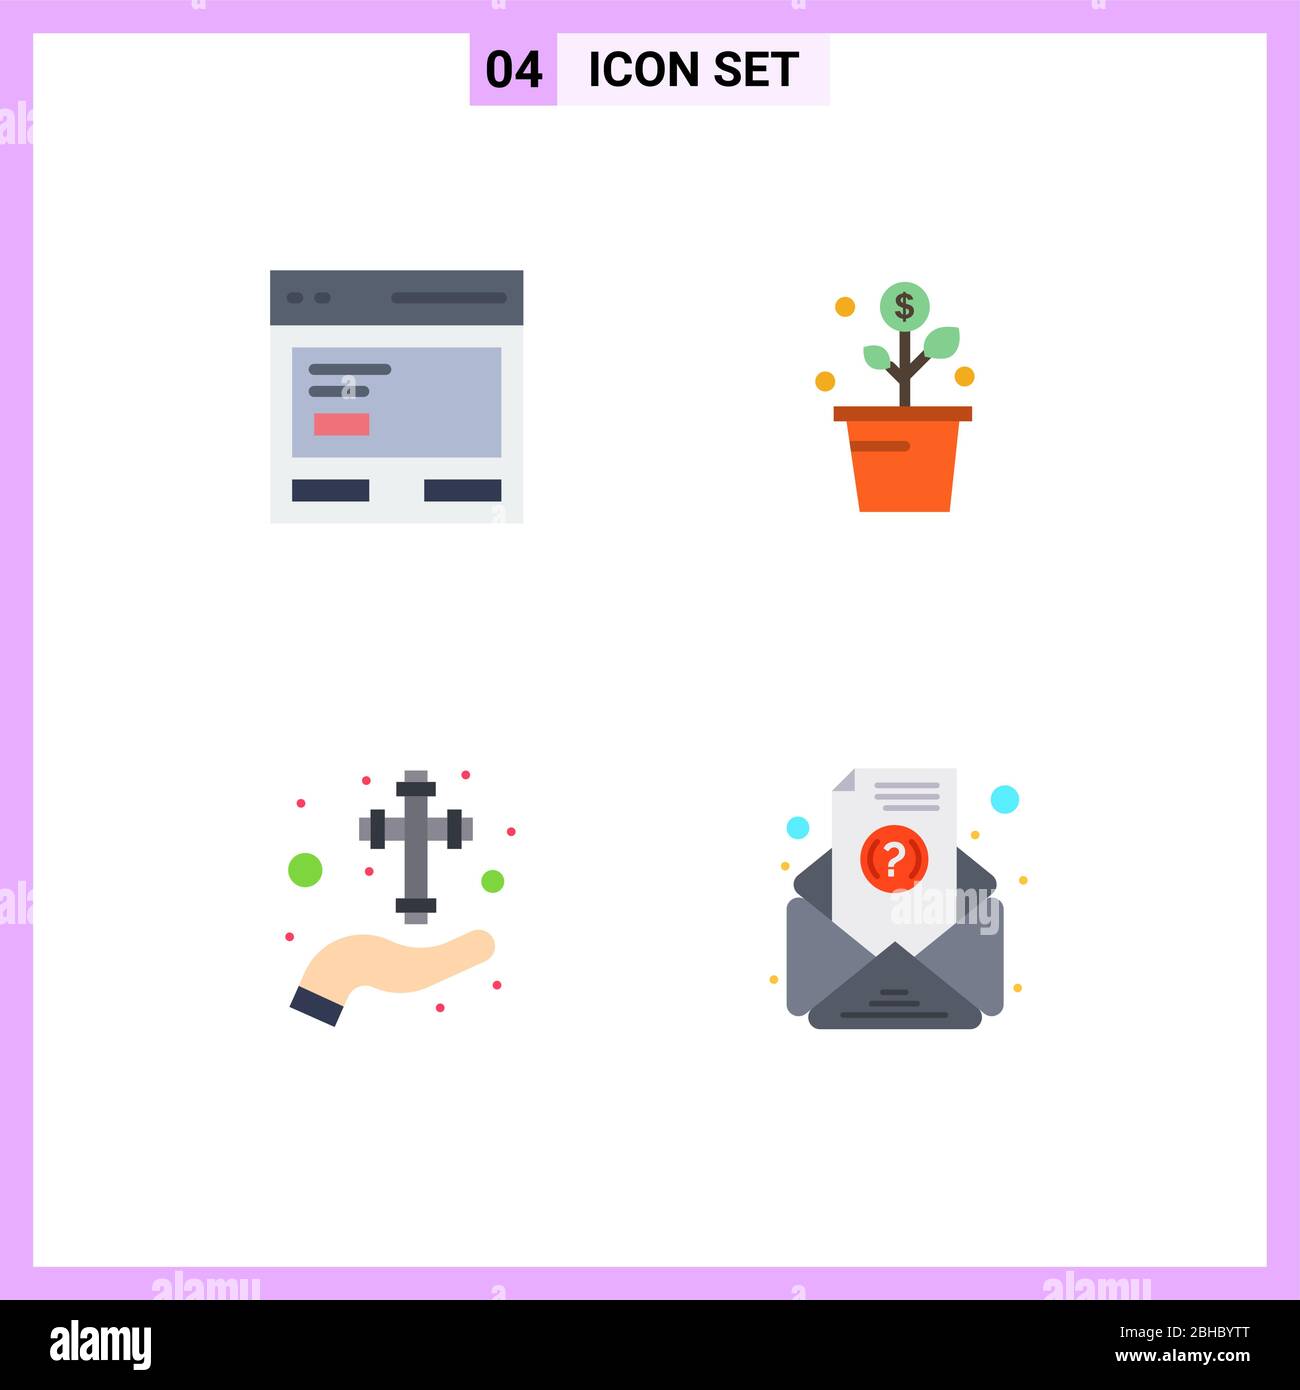 User Interface Pack of 4 Basic Flat Icons of action, plant, interface, money, hand Editable Vector Design Elements Stock Vector